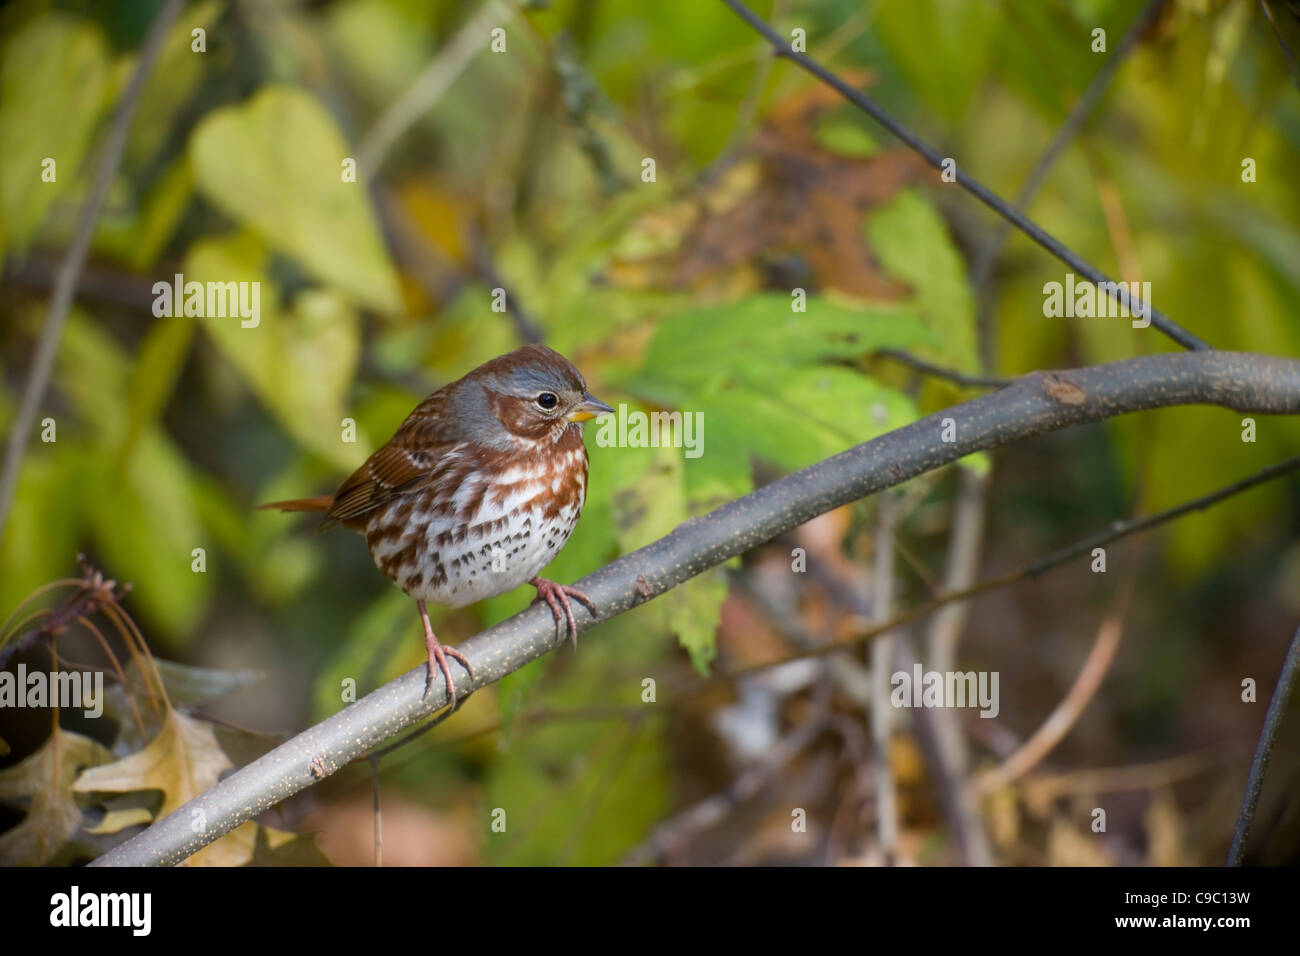 Fox Sparrow (Passerella iliaca iliaca), Red subspecies, perched on a branch in New York City's Central Park. Stock Photo